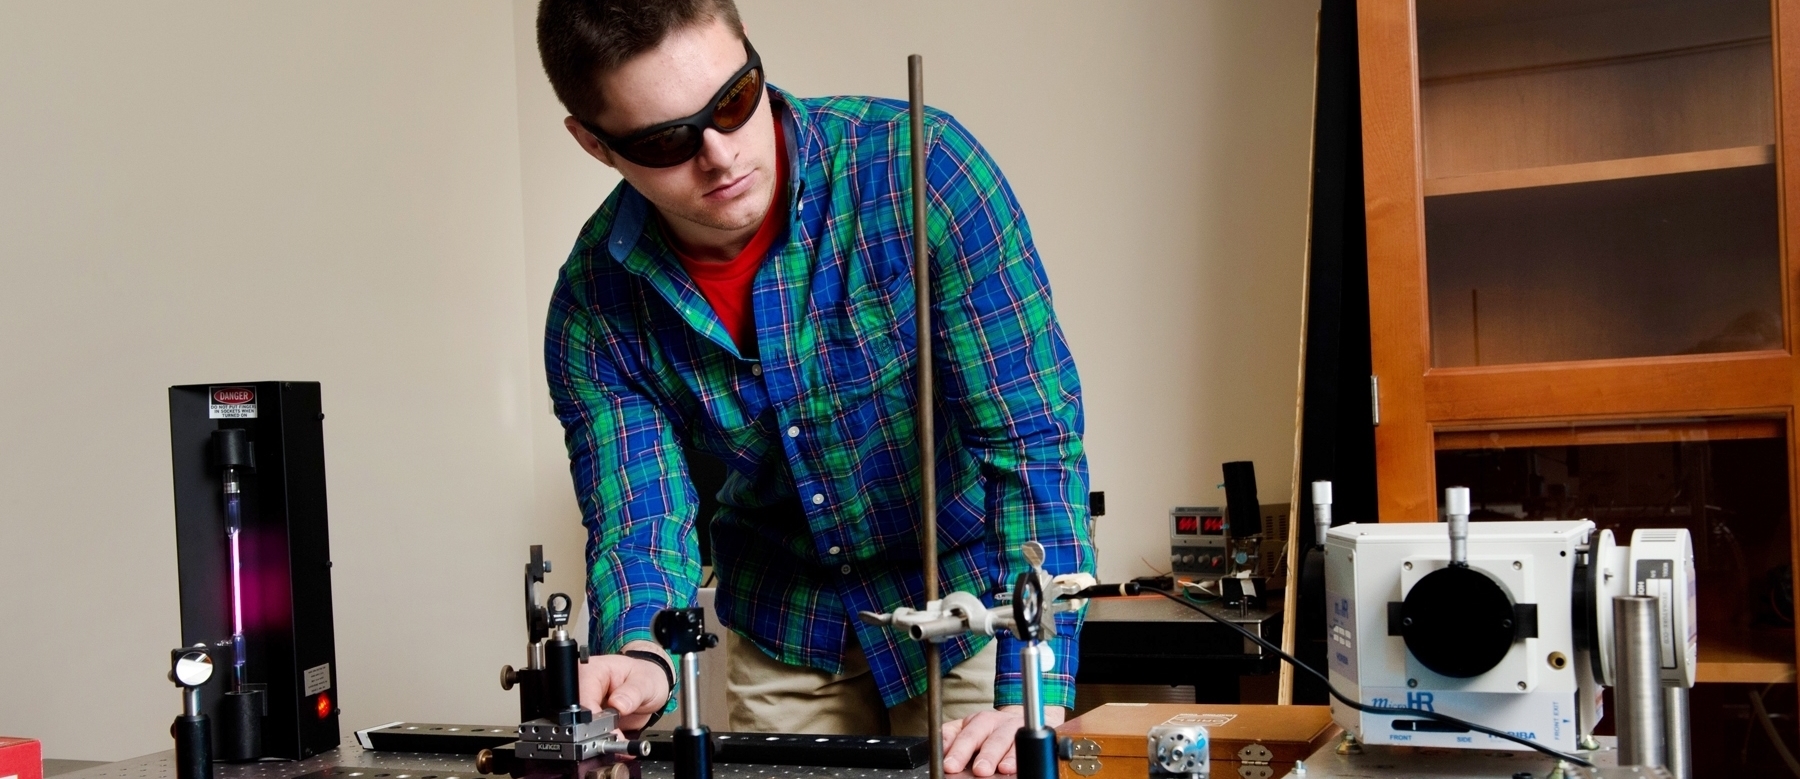 Student using laser in physics lab